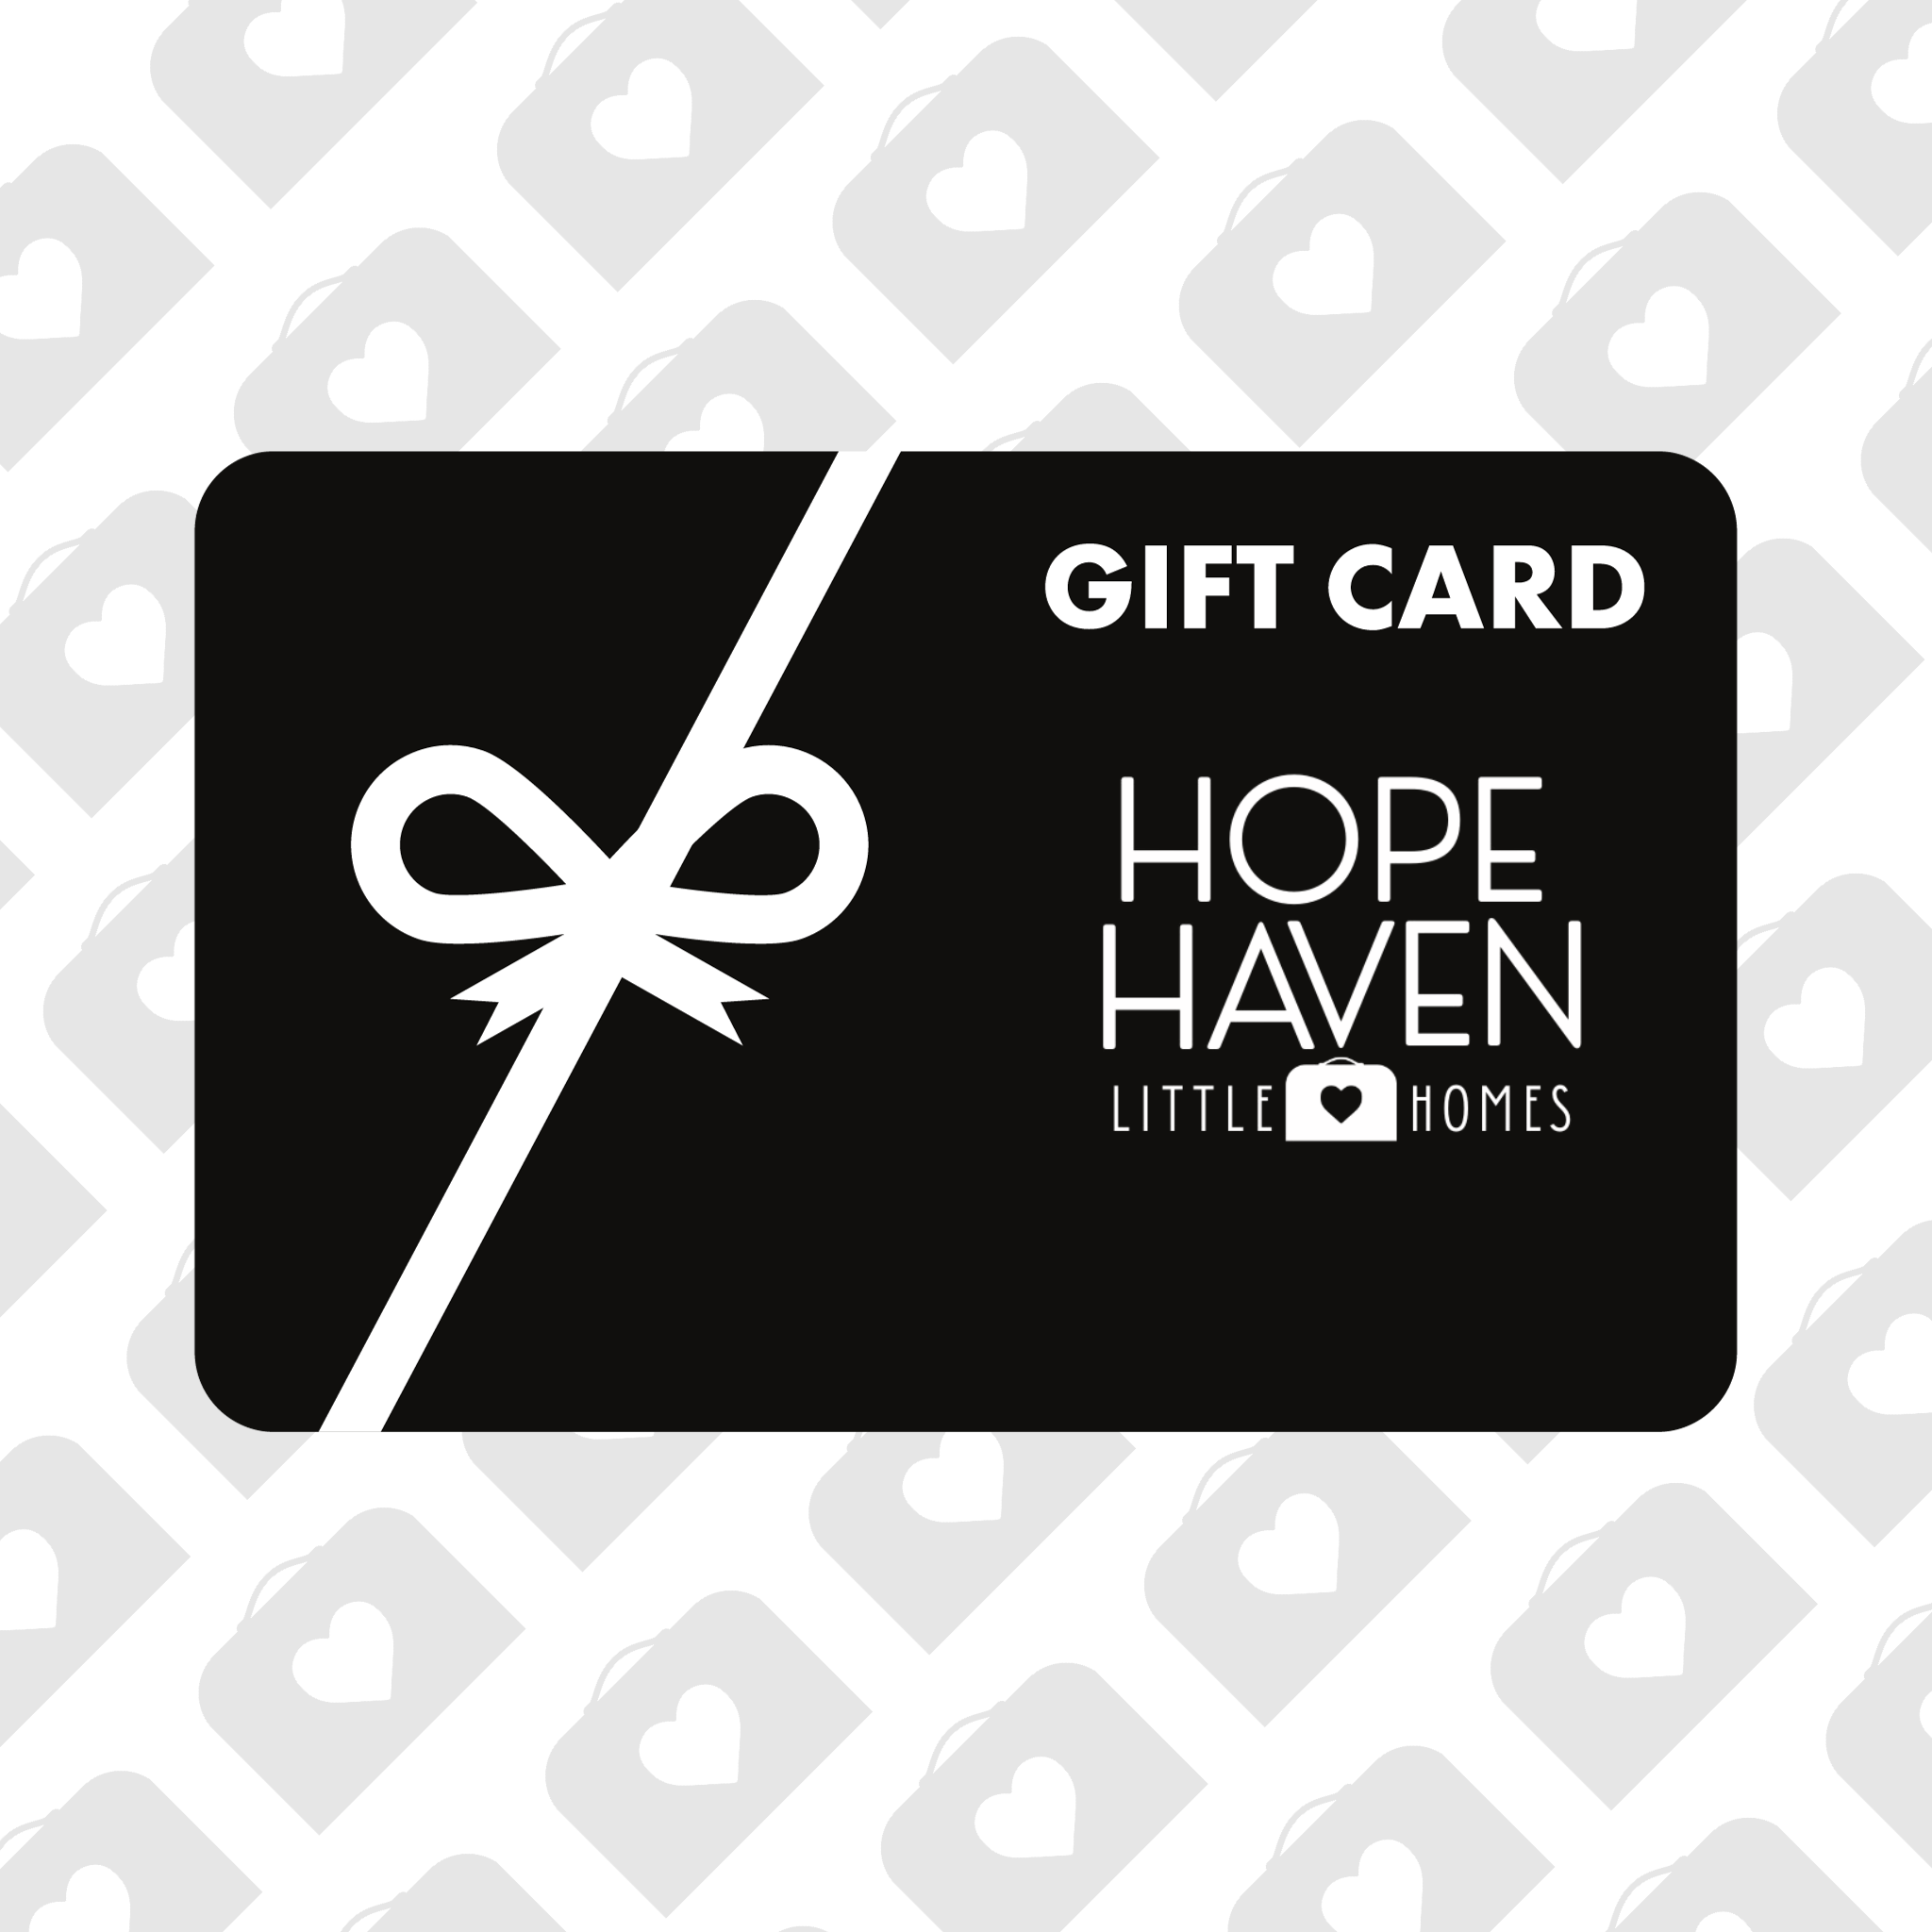 HOPE HAVEN GIFT CARD